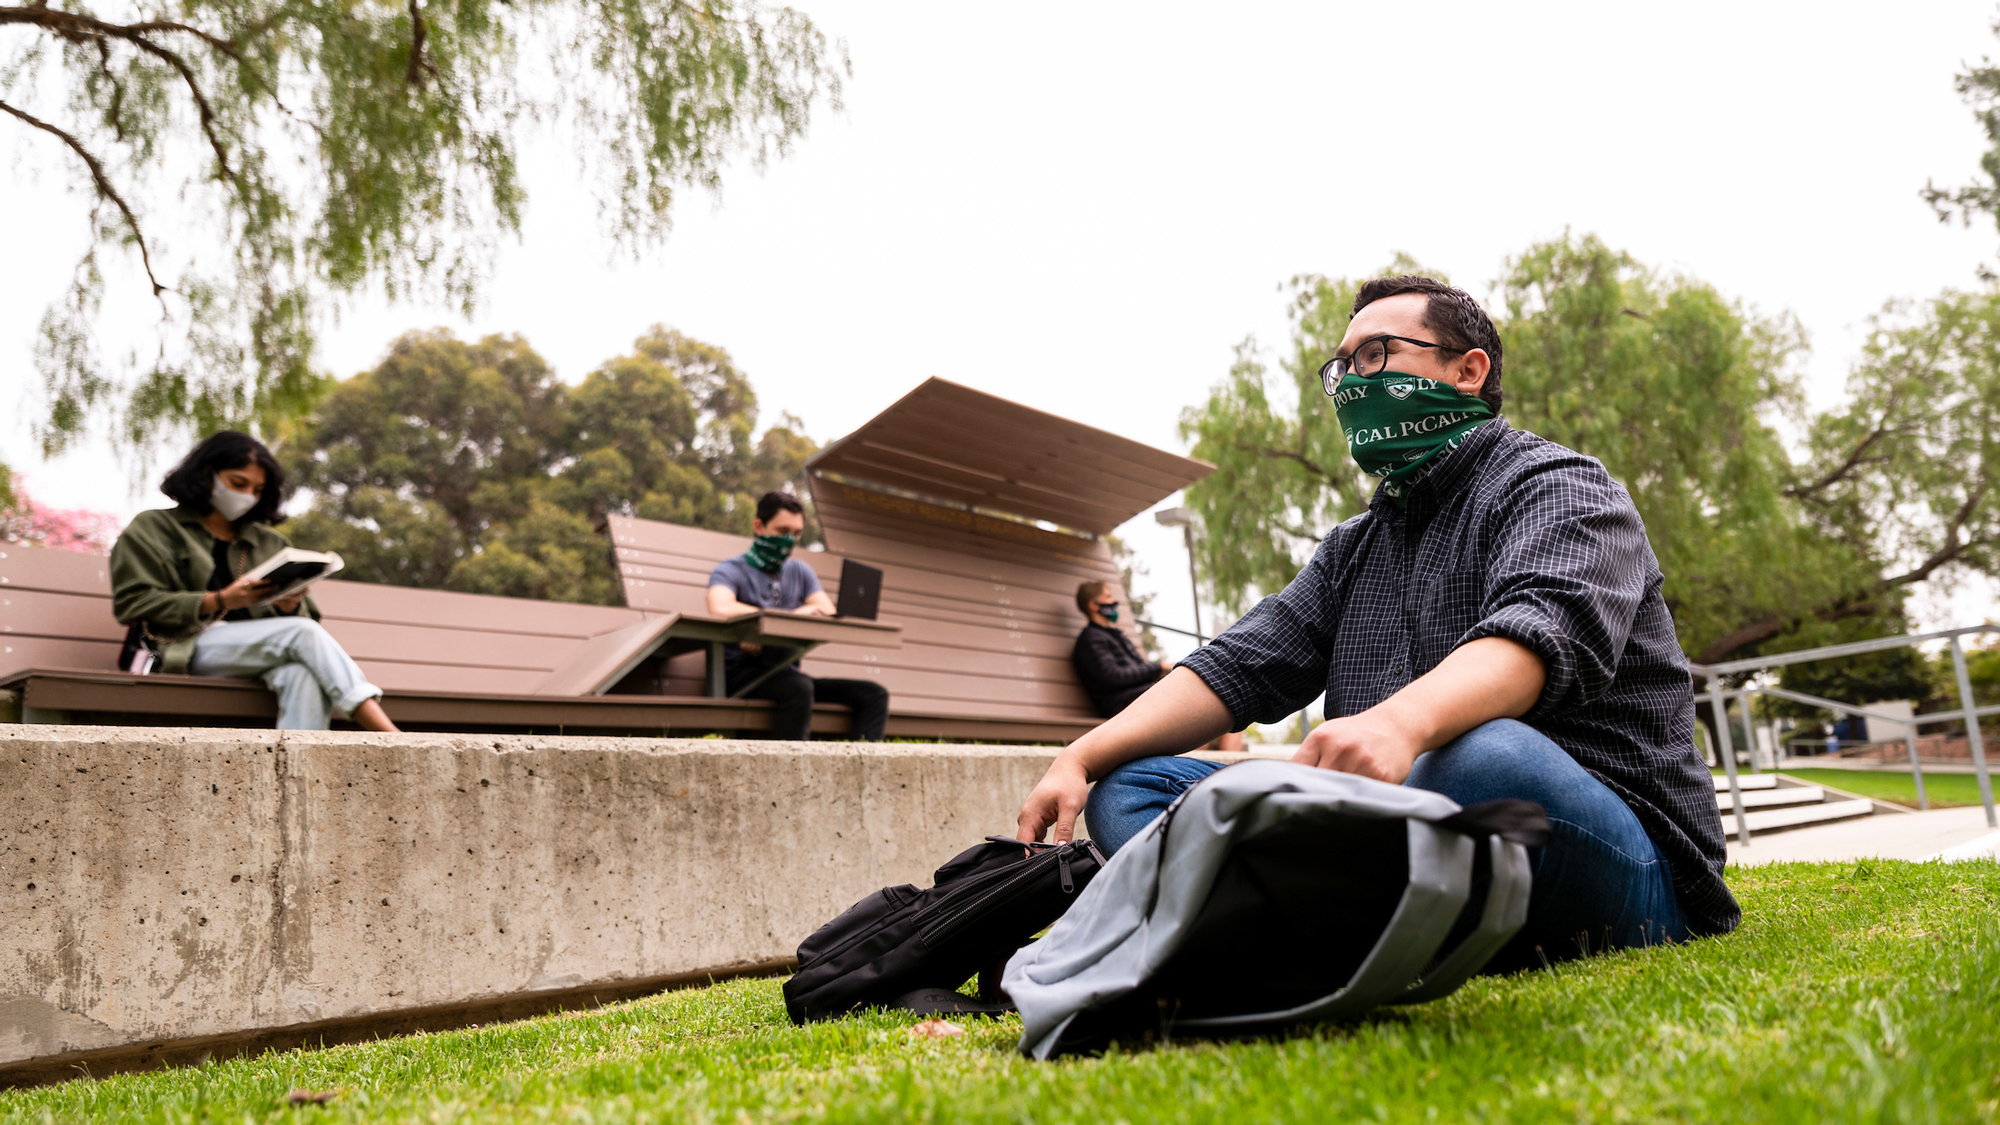 Four students sit on grass and benches wearing masks